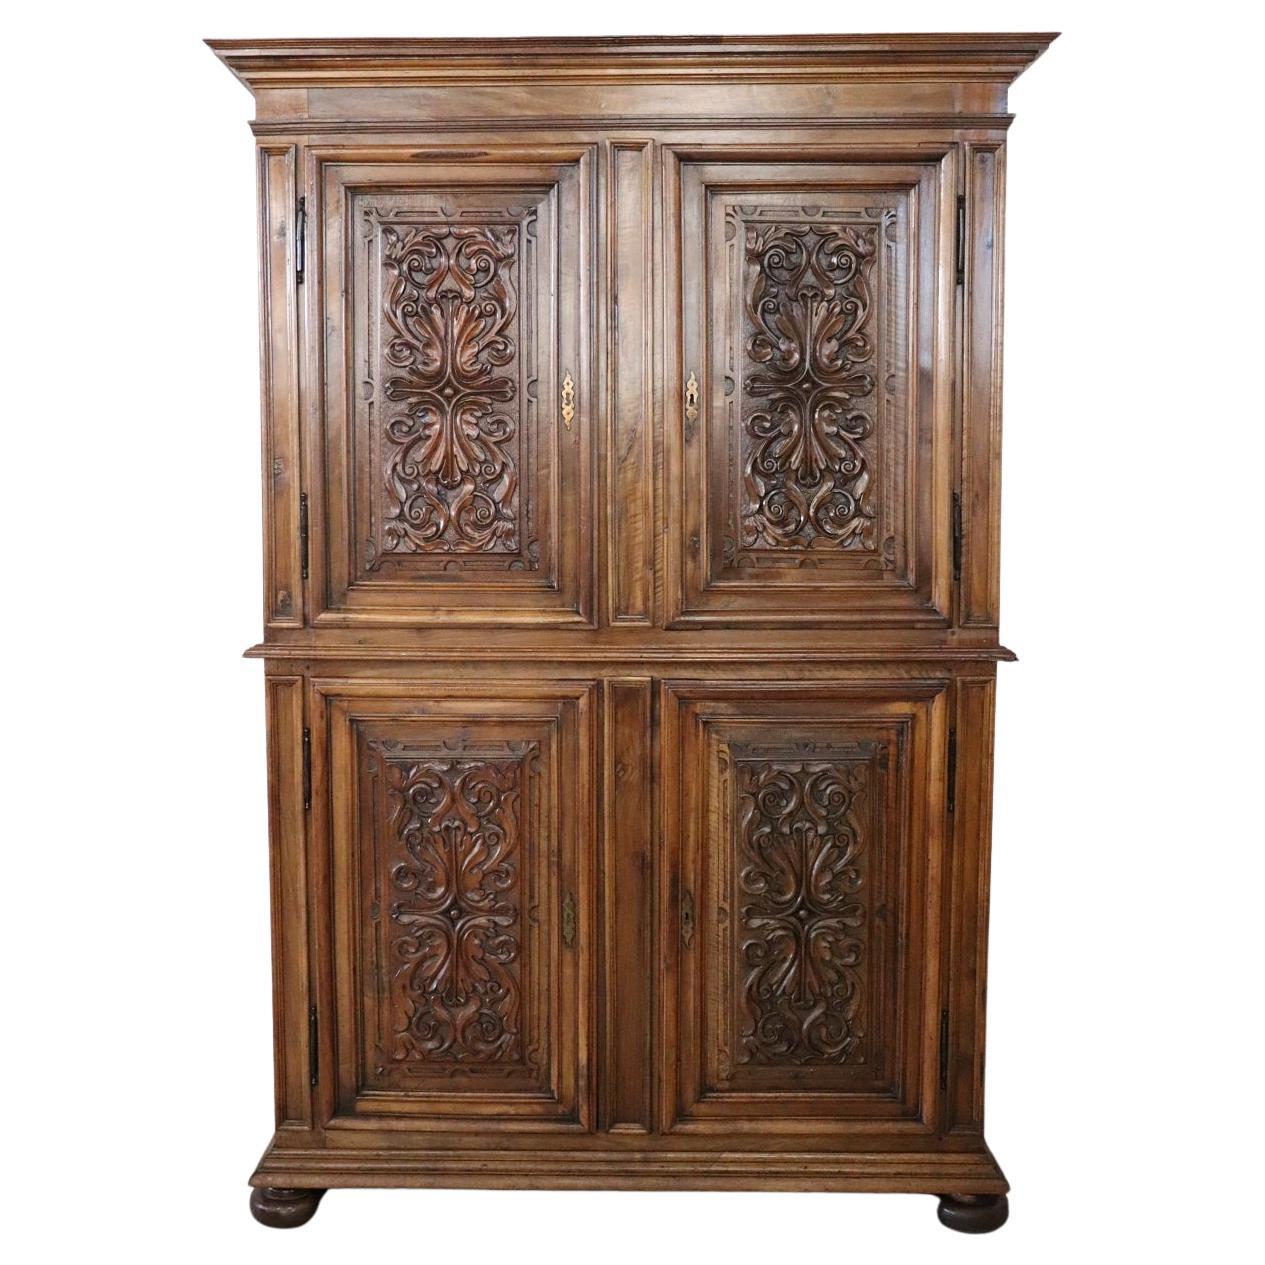 19th Century Italian Antique Cabinet in Solid Carved Walnut